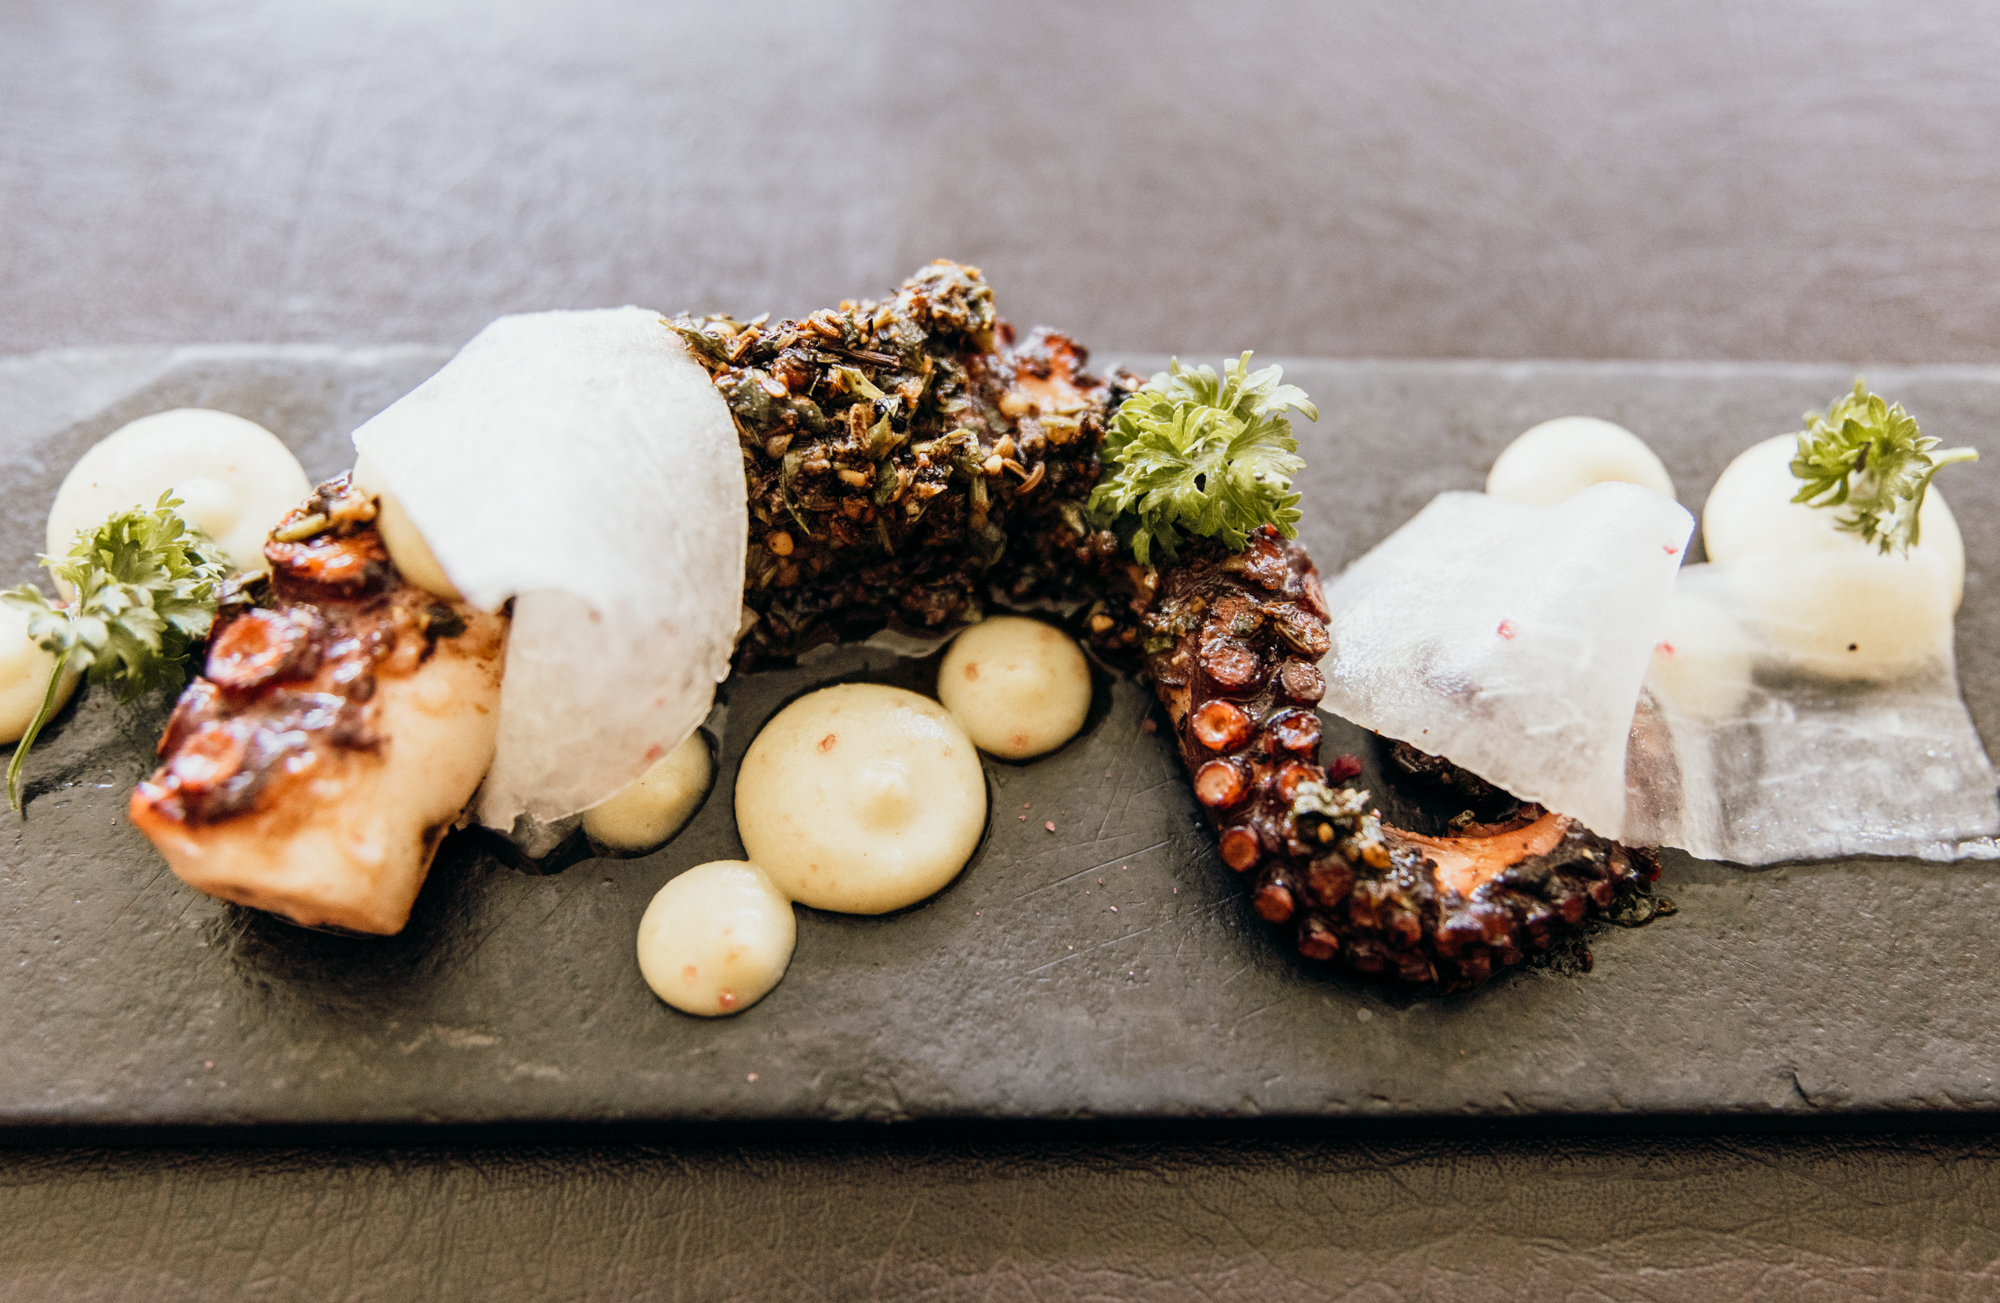 WHERE TO EAT THE BEST OCTOPUS IN SANTIAGO